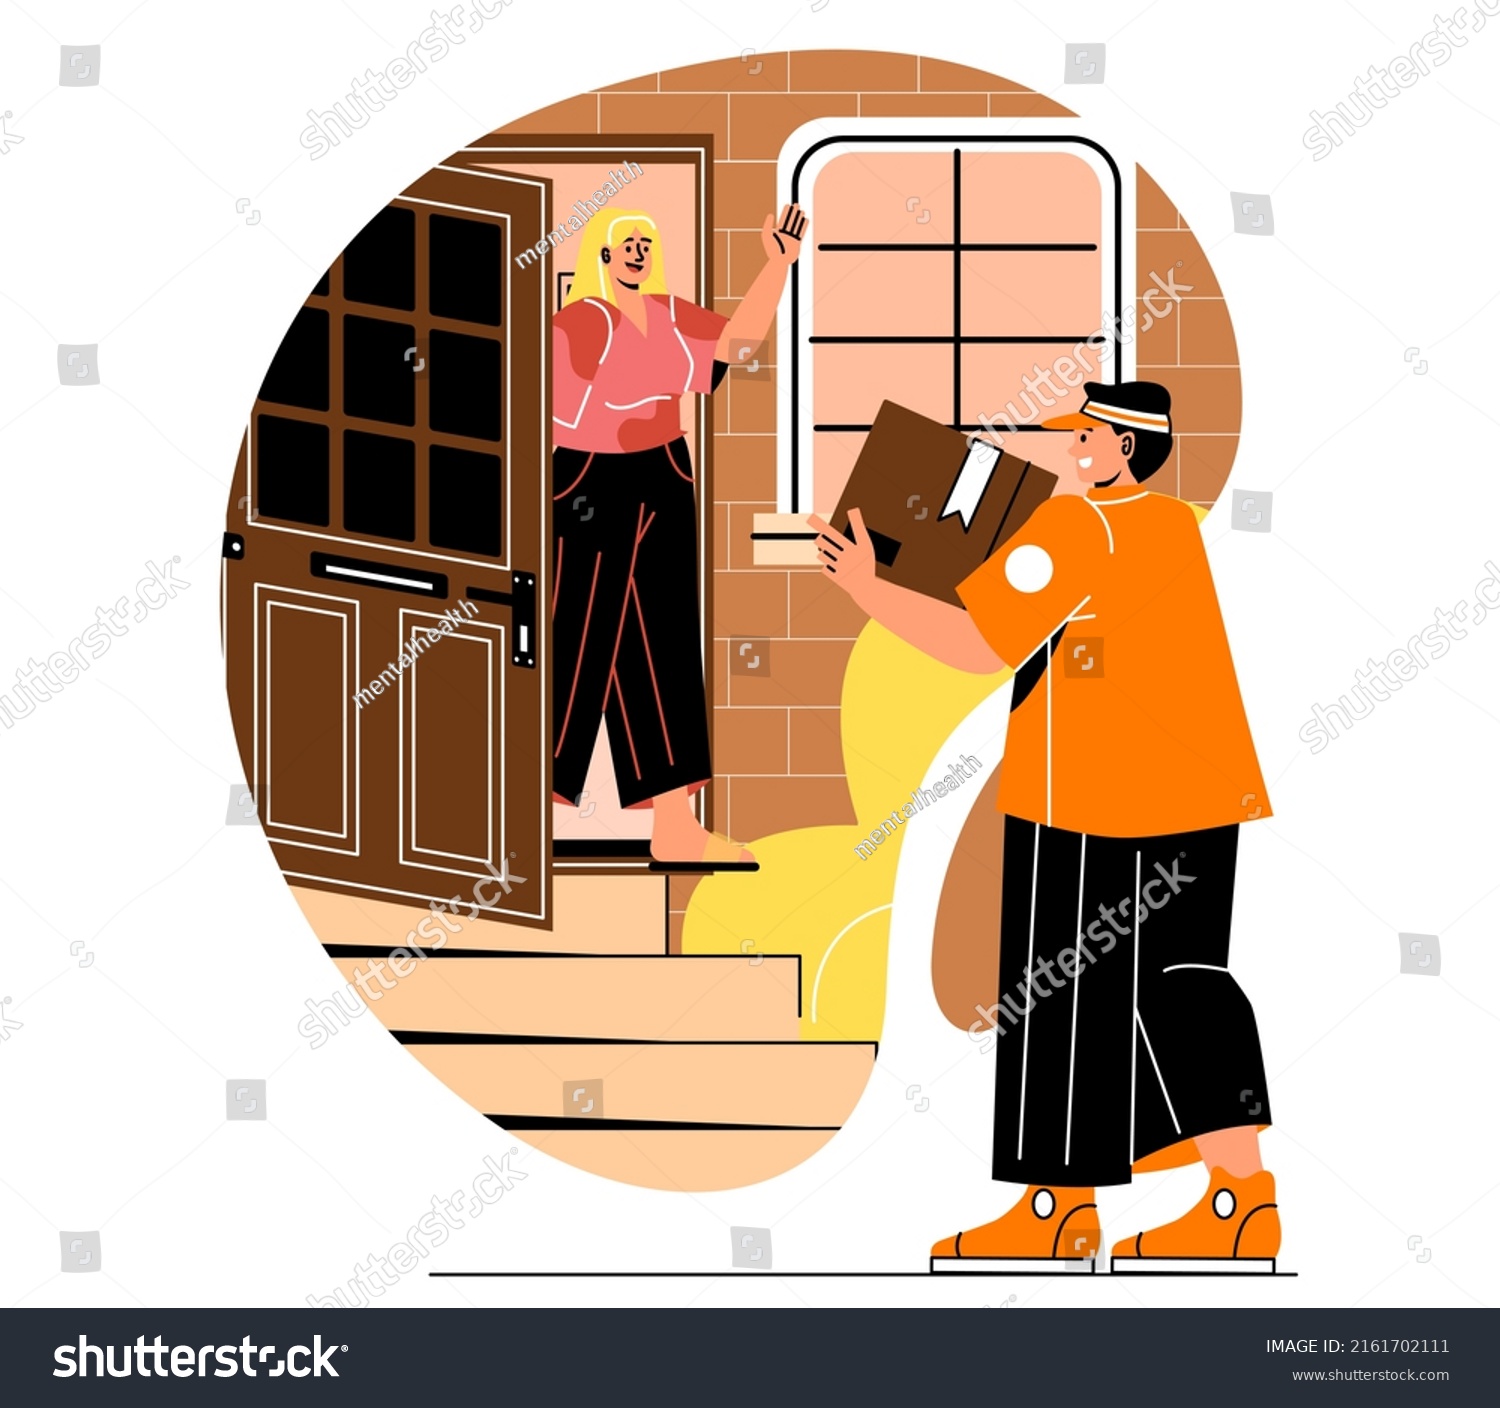 SVG of Process of online order. Young girl opens door to courier with parcel, online shopping and home delivery. Completed order and logistics, man and woman near house. Cartoon flat vector illustration svg